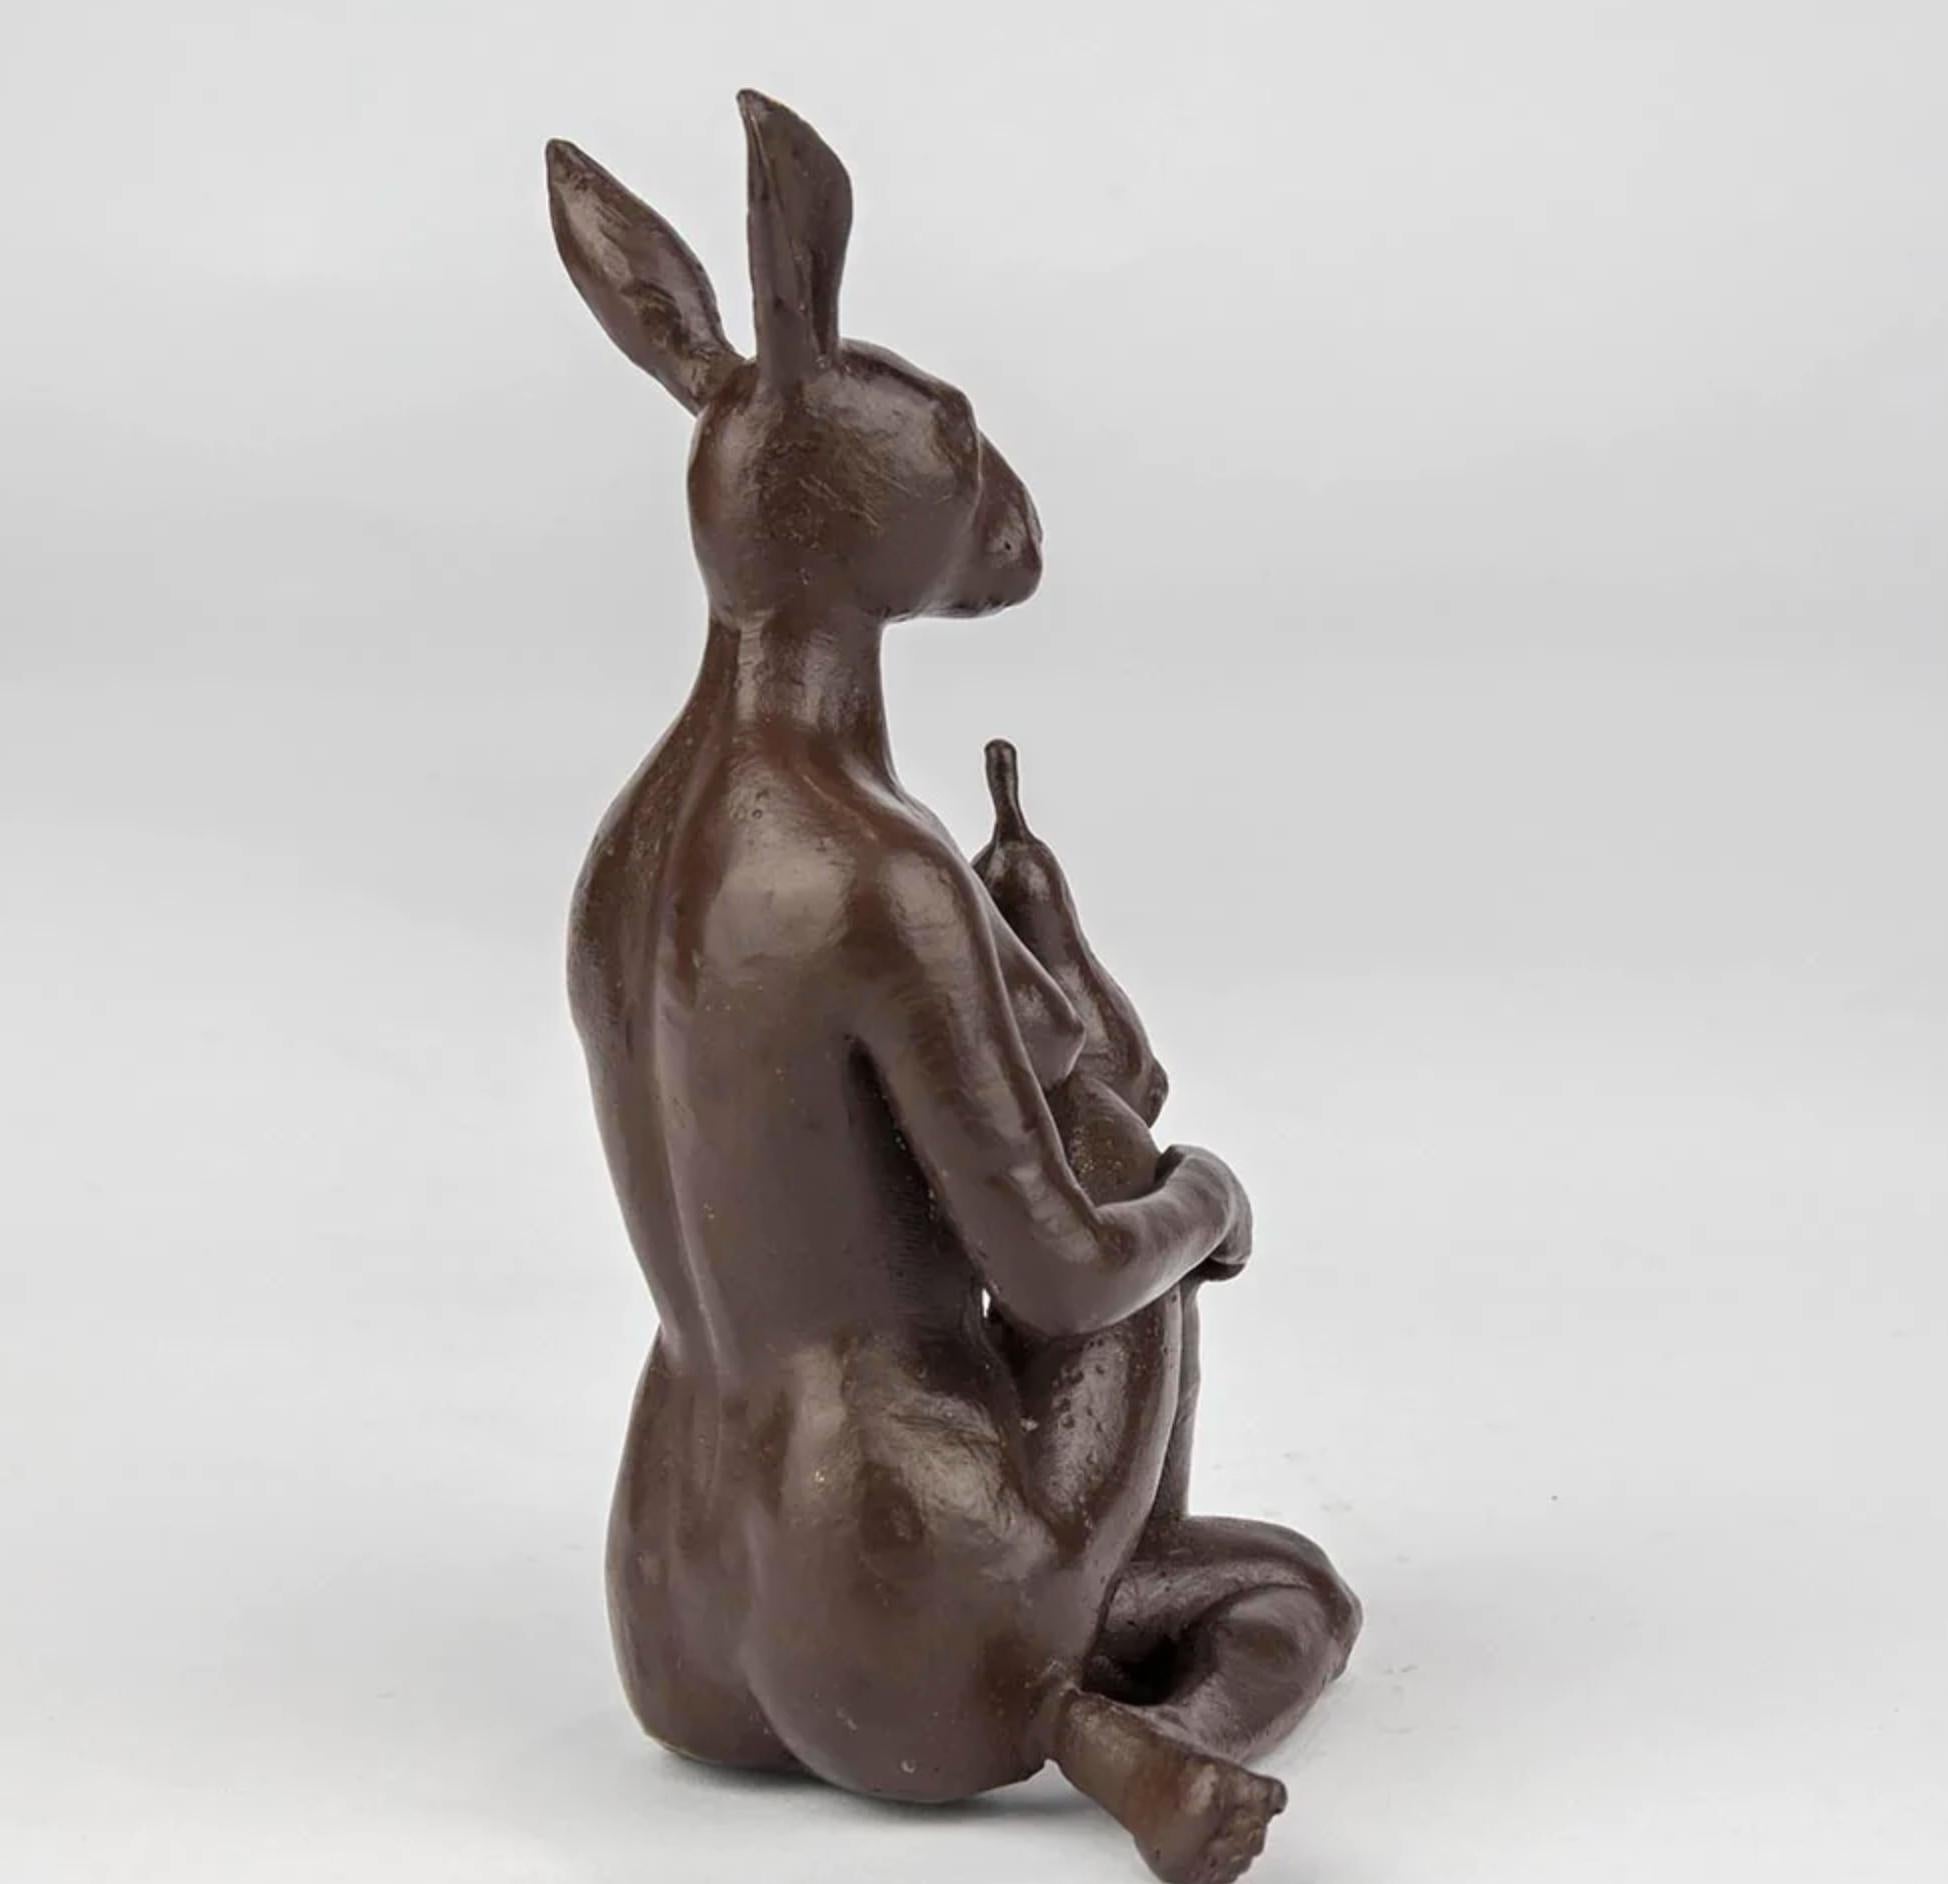 Title: The Pearfect Rabbit
Authentic bronze sculpture

This authentic bronze sculpture titled 'The Pearfect Rabbit' by artists Gillie and Marc has been meticulously crafted in bronze. It features Gillie and Marcs rabbitwoman sitting while holding a